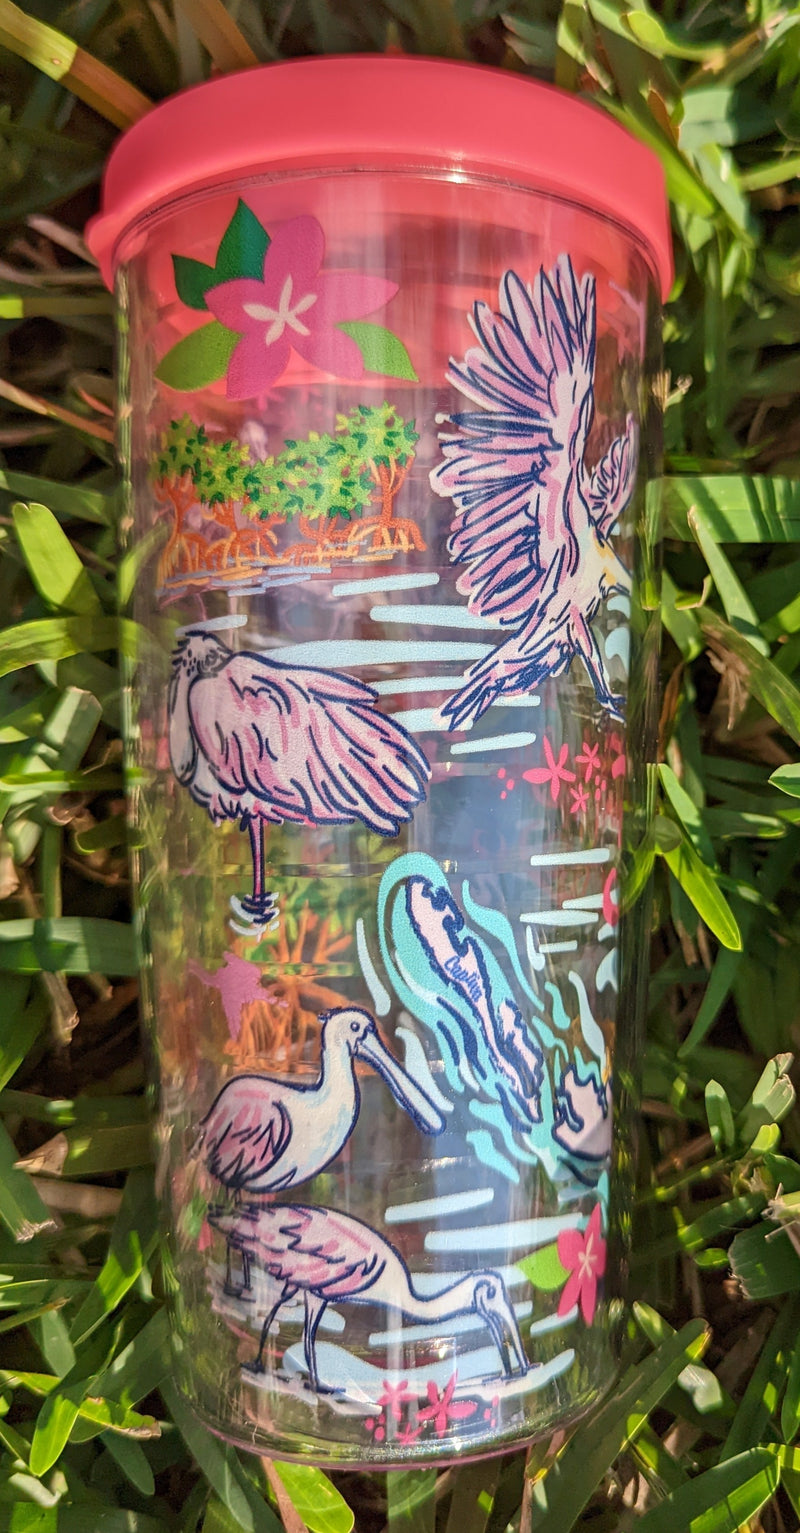 *NEW* Exclusive "Ding" Darling Spoonbill Tumbler with Lid - 16oz